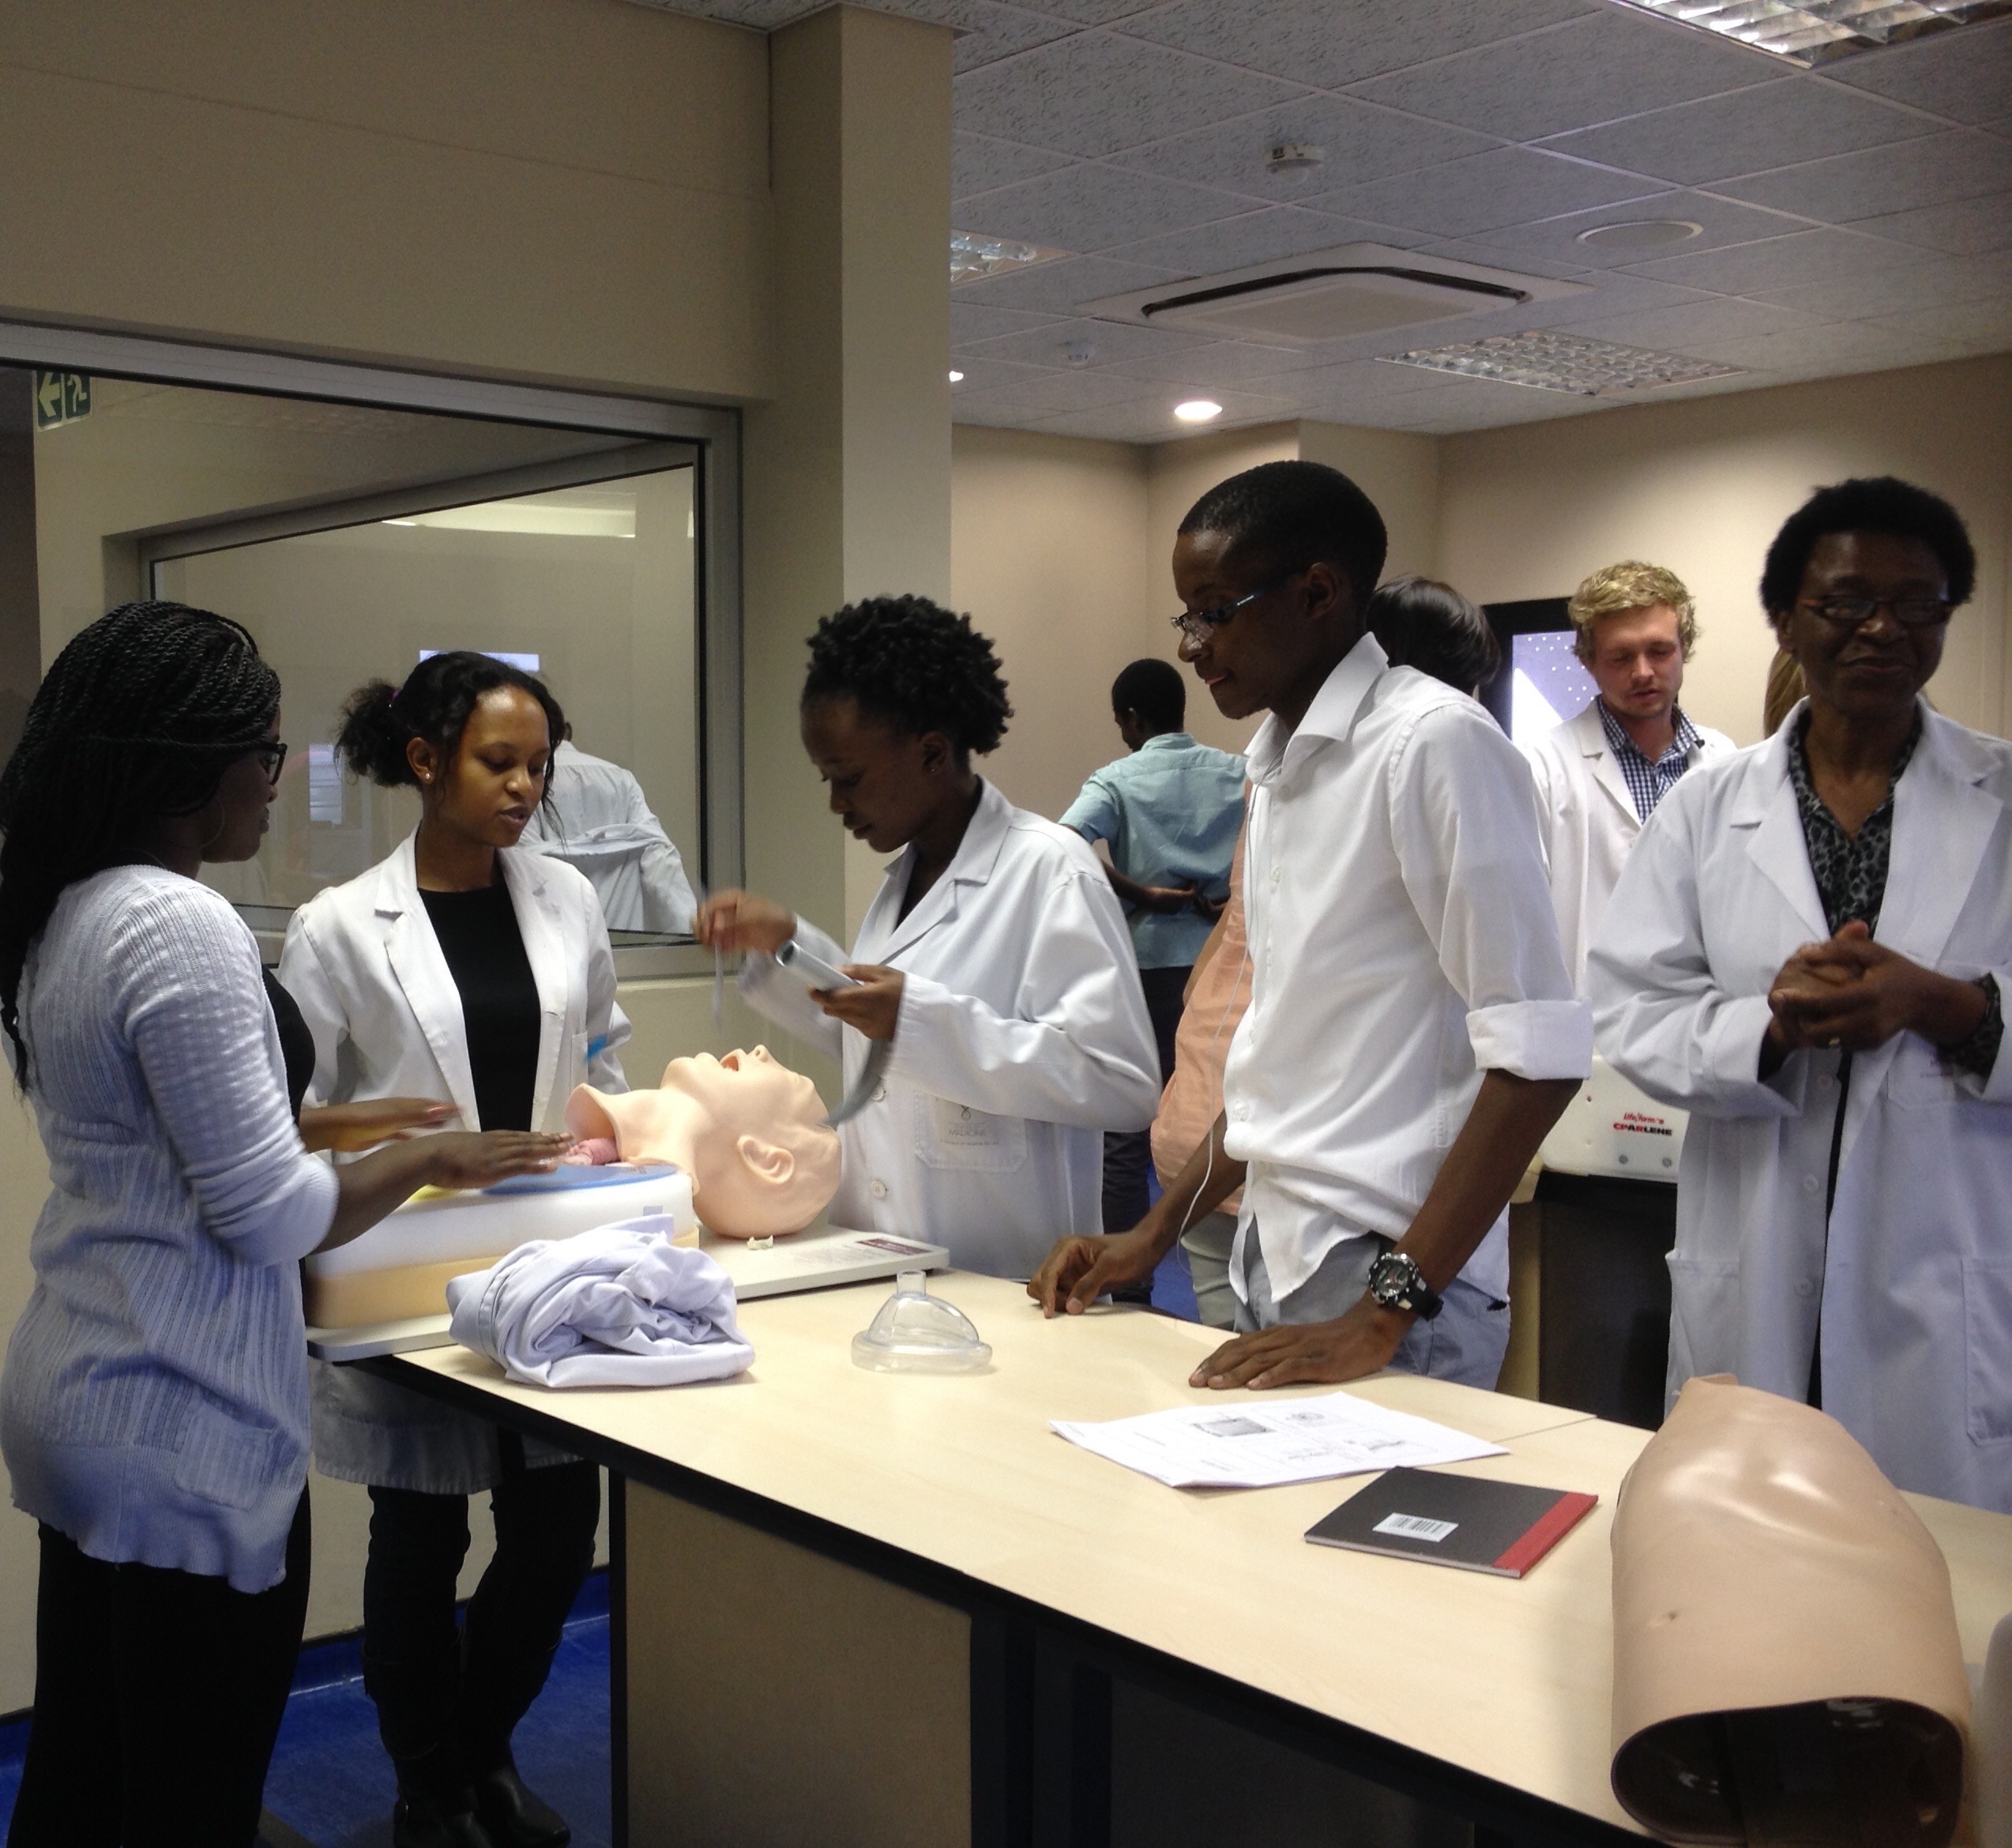 All students successfully complete their first Anaesthesia course at UNAM